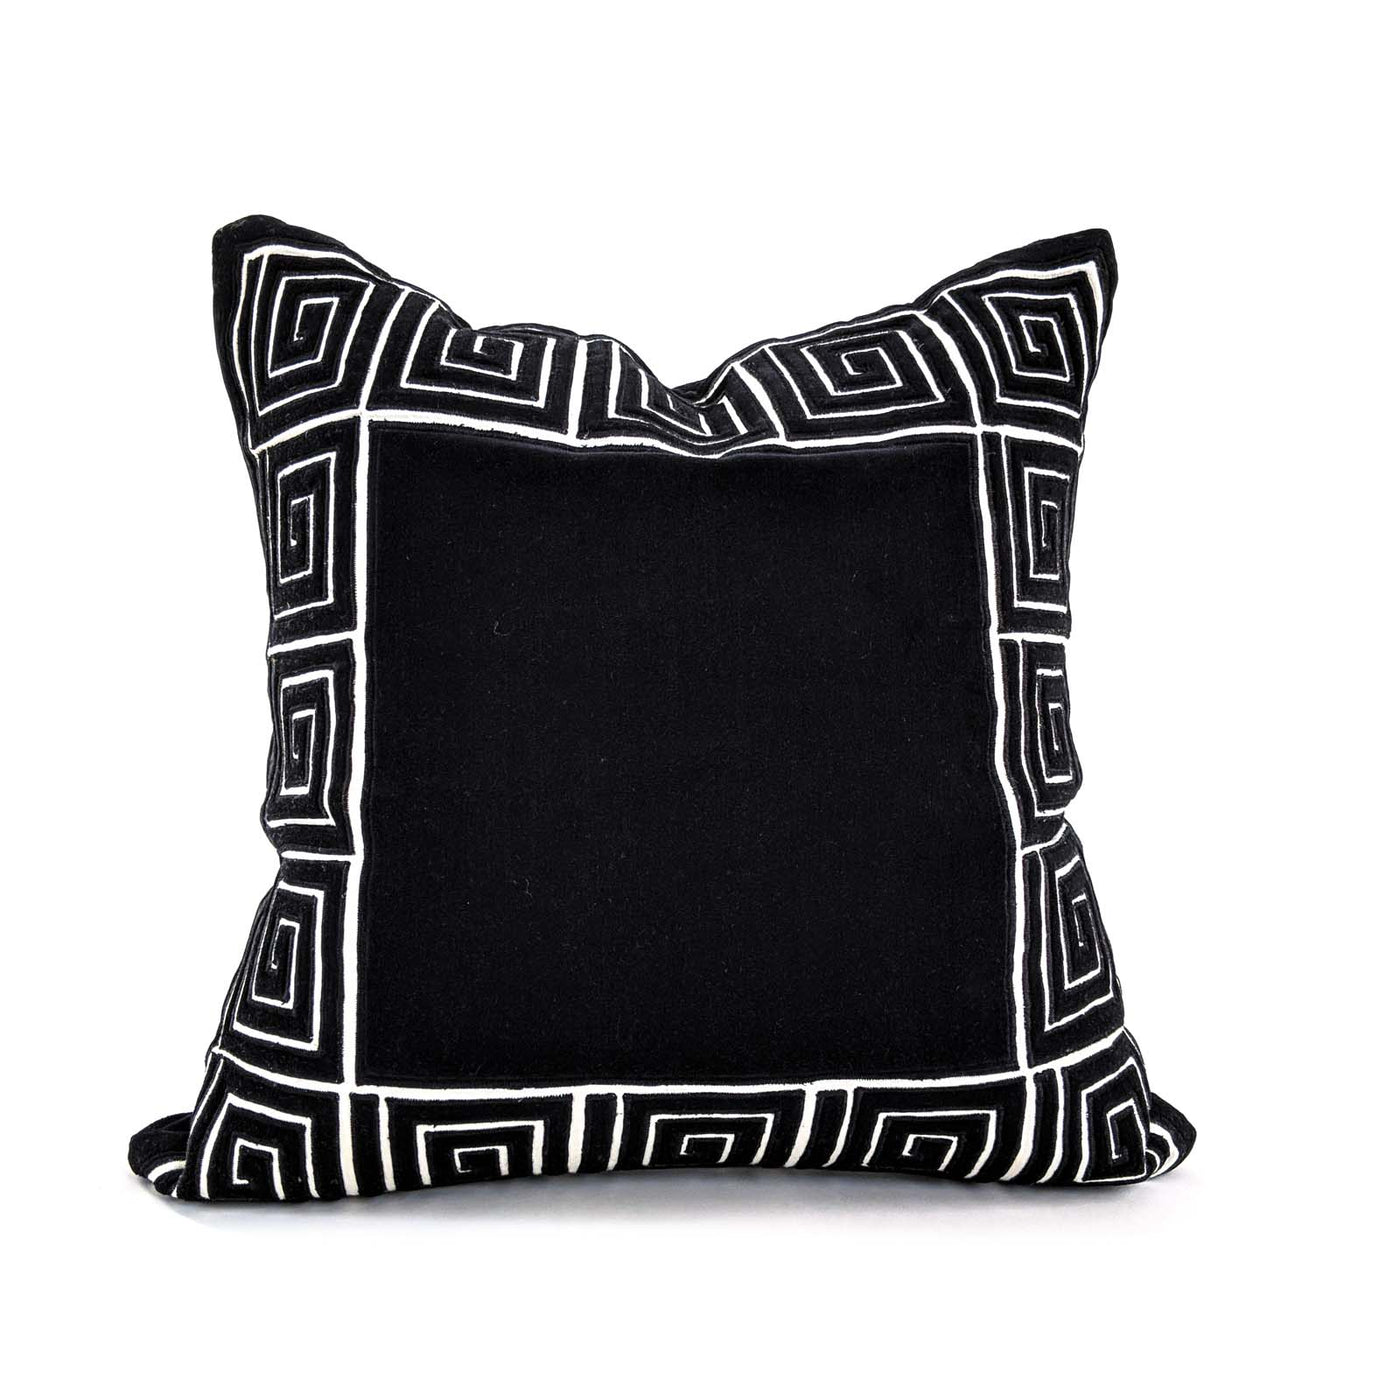 Geometric beauty. The Maze Design keeps it simple with bold borders and exquisite hand cutwork